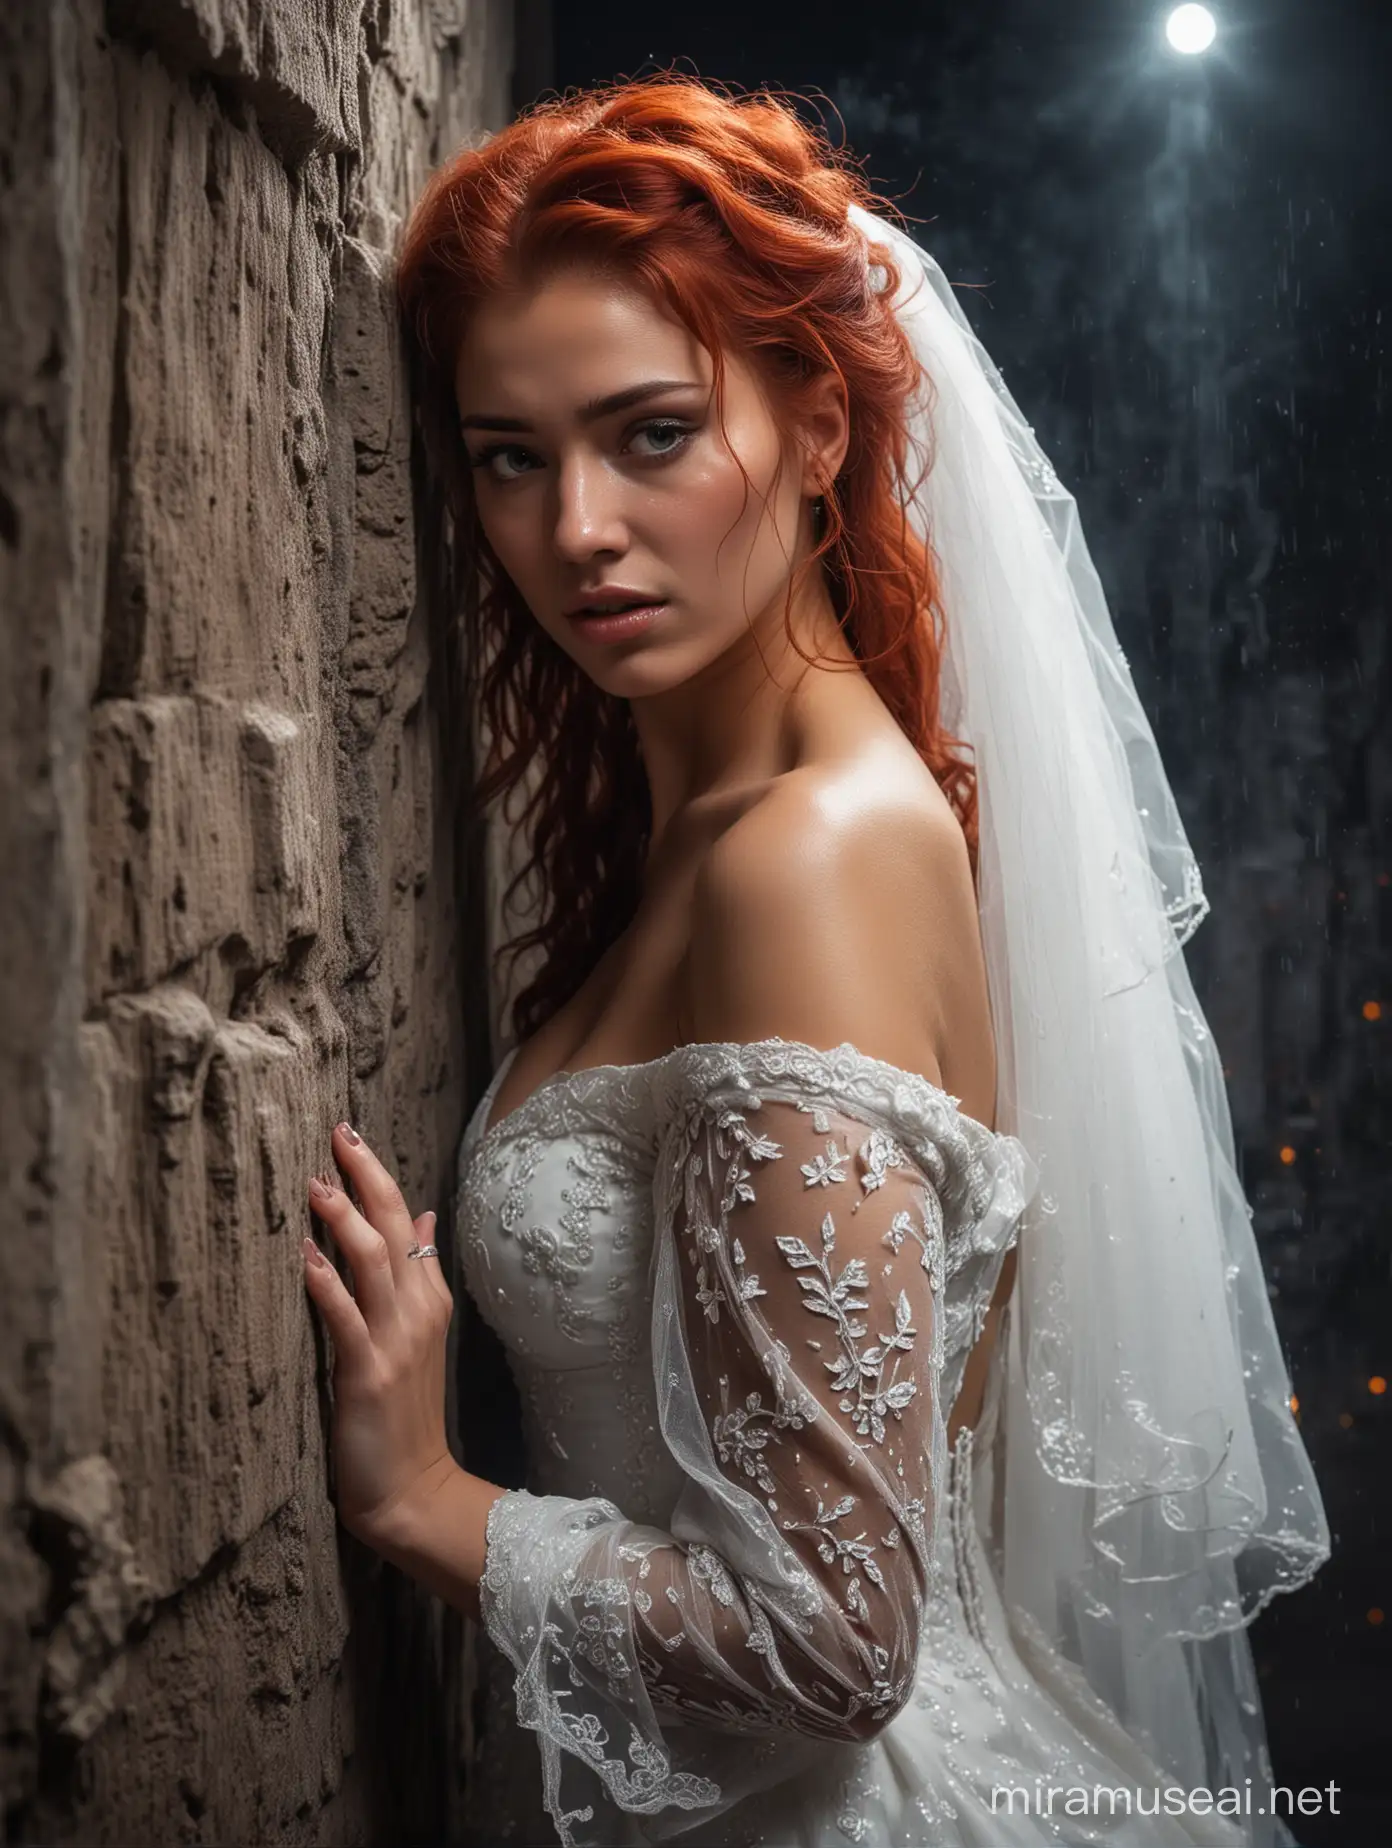 Young Woman in Bridal Tears Seeks Solitude Behind Wall While Being Watched at Night